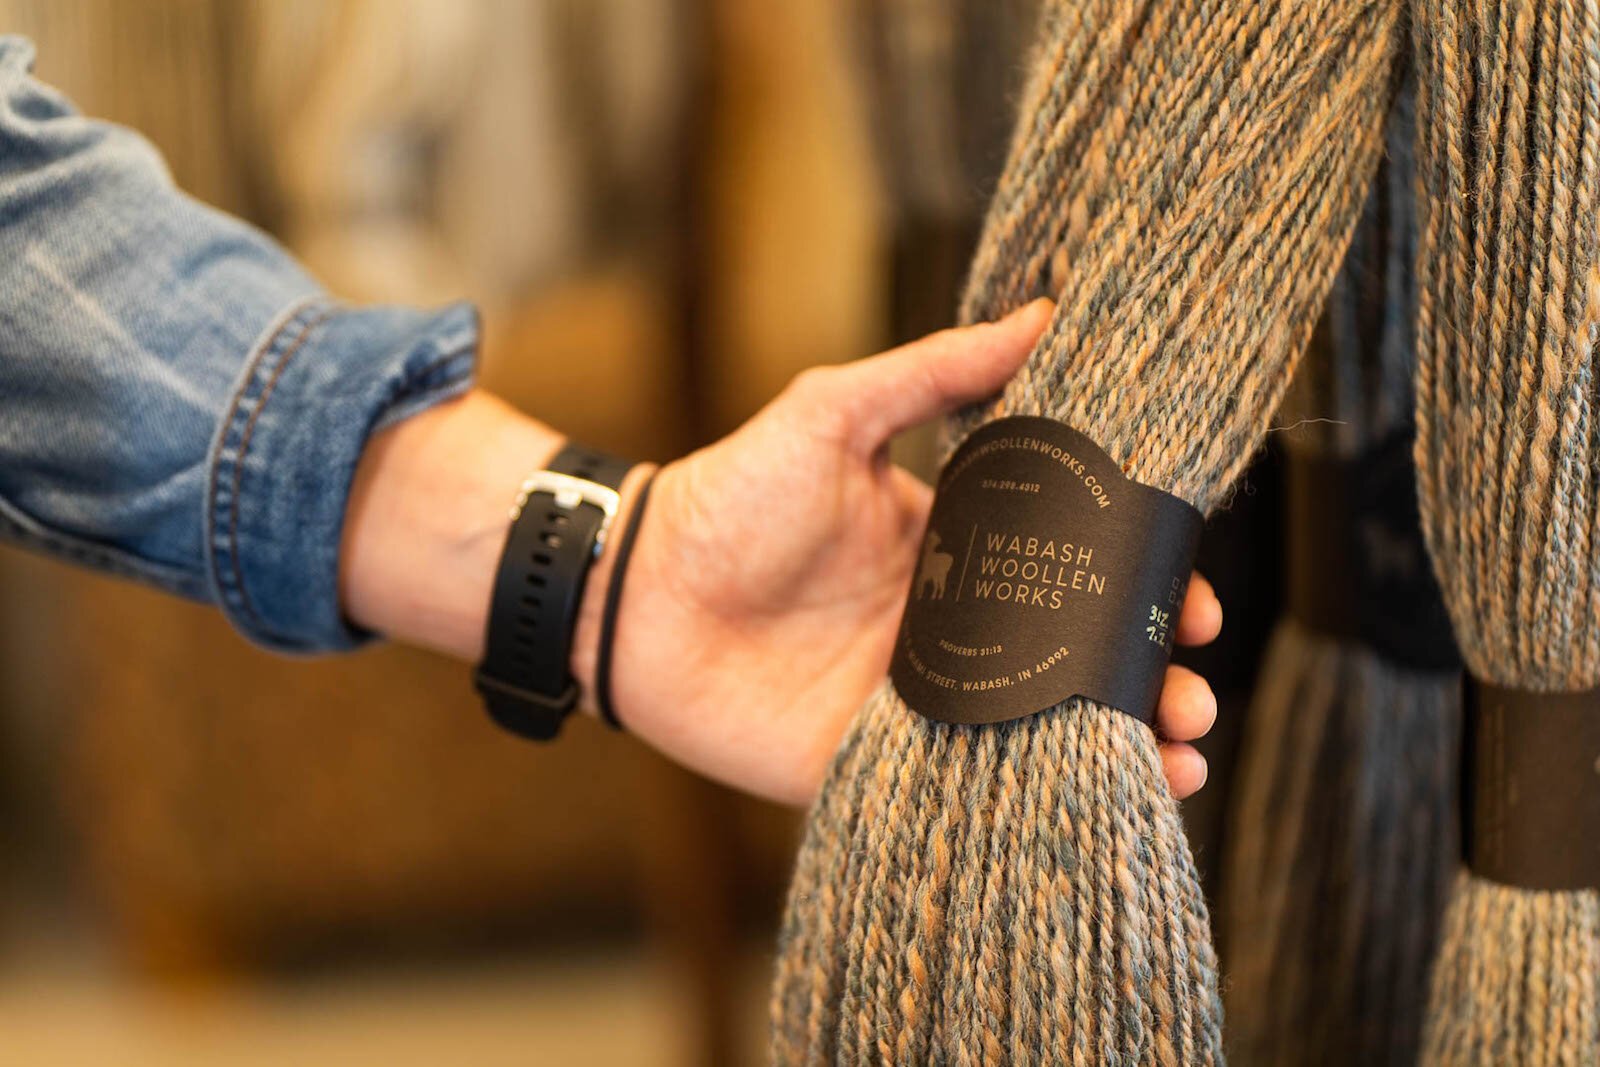 Wabash Woolen Works is the only manufacturing mill in Indiana producing luxury yarn, roving, and felted pieces.